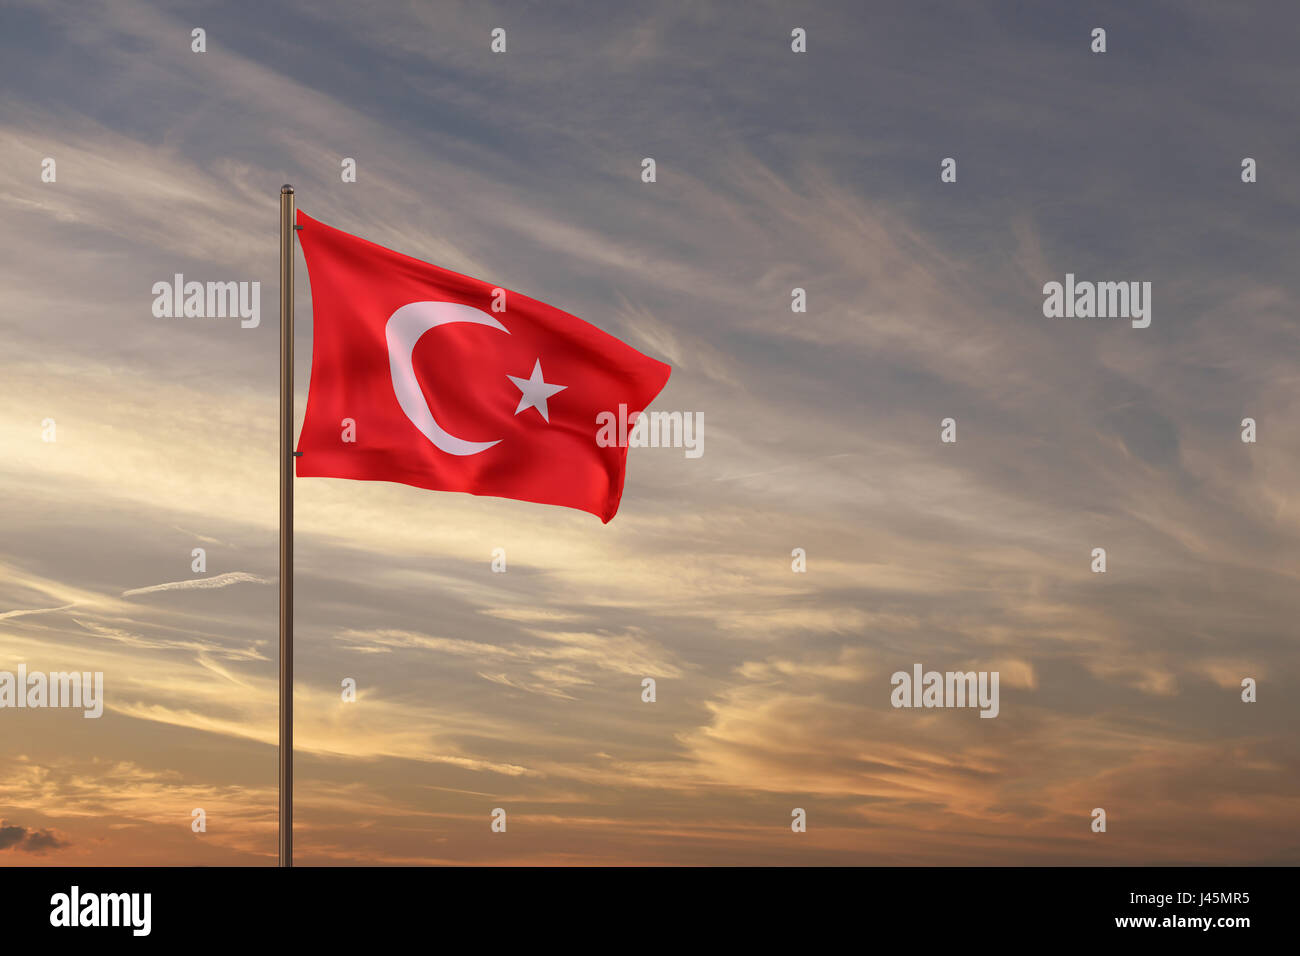 Turkish flag on the background of the sky. Stock Photo